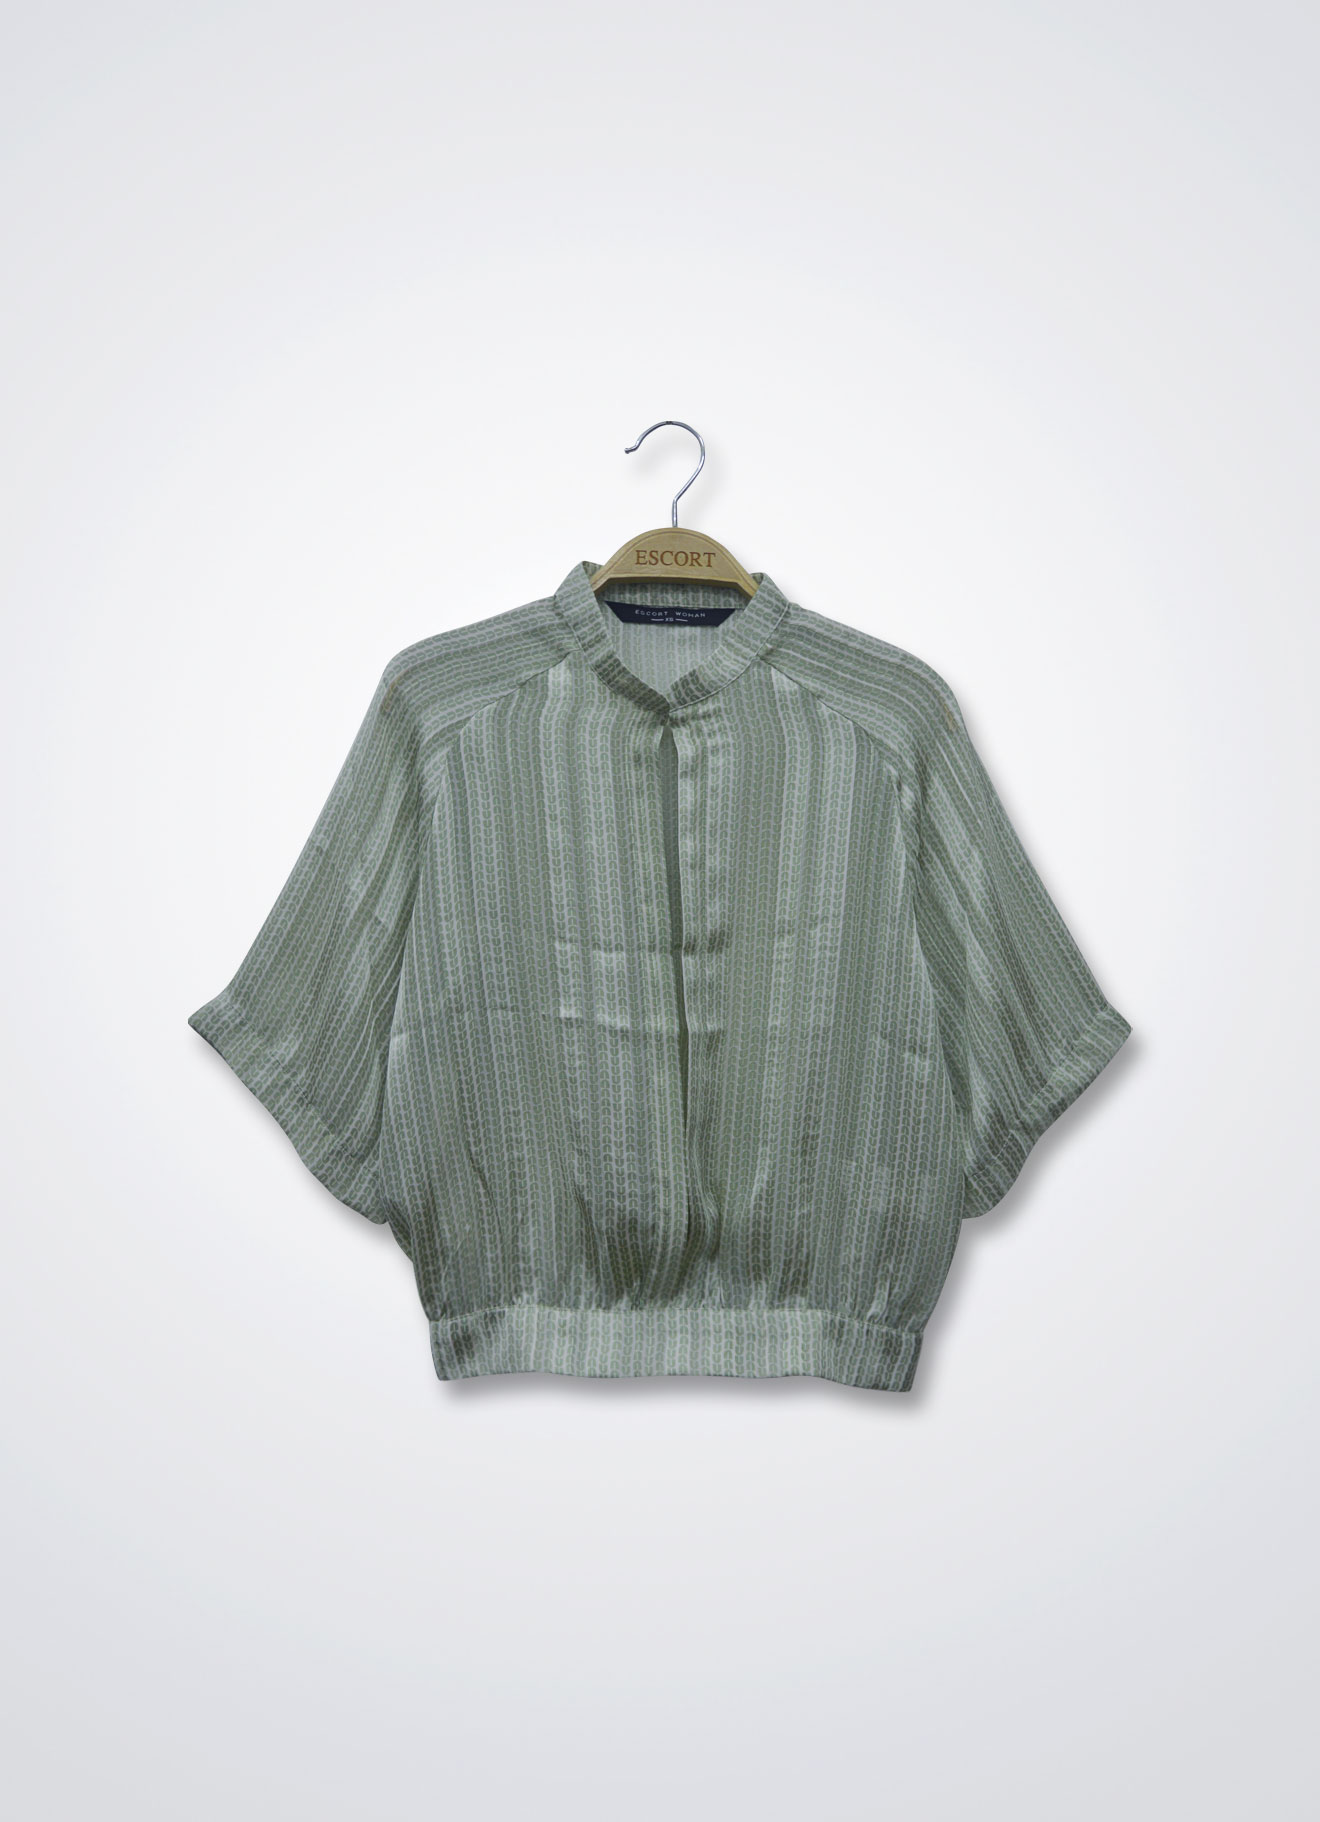 Quiet-Green by Sleeve Top